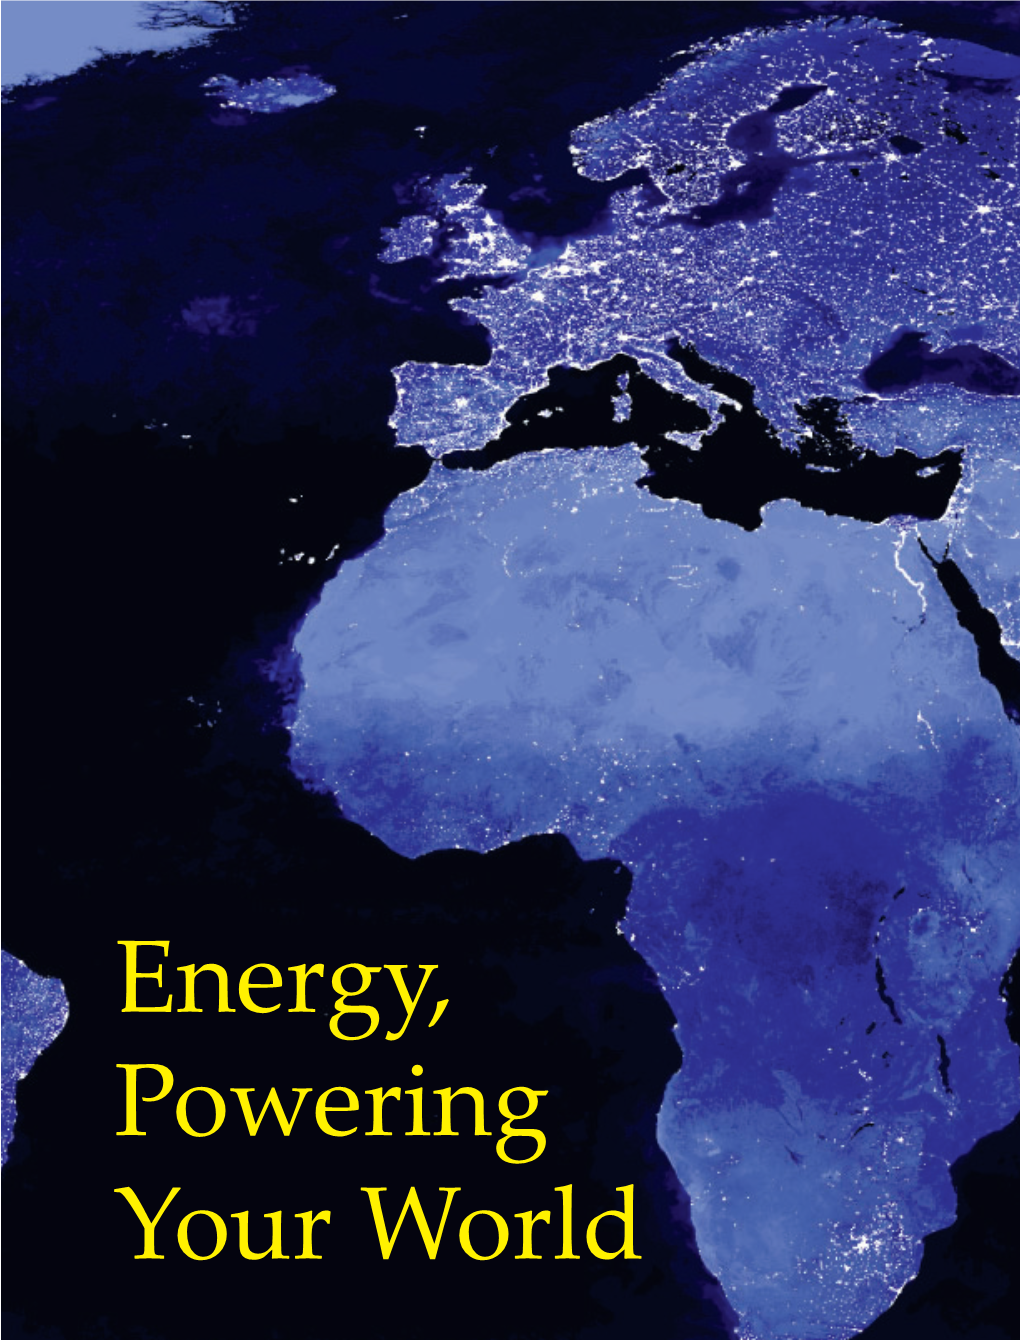 Energy, Powering Your World 62 PREFACE